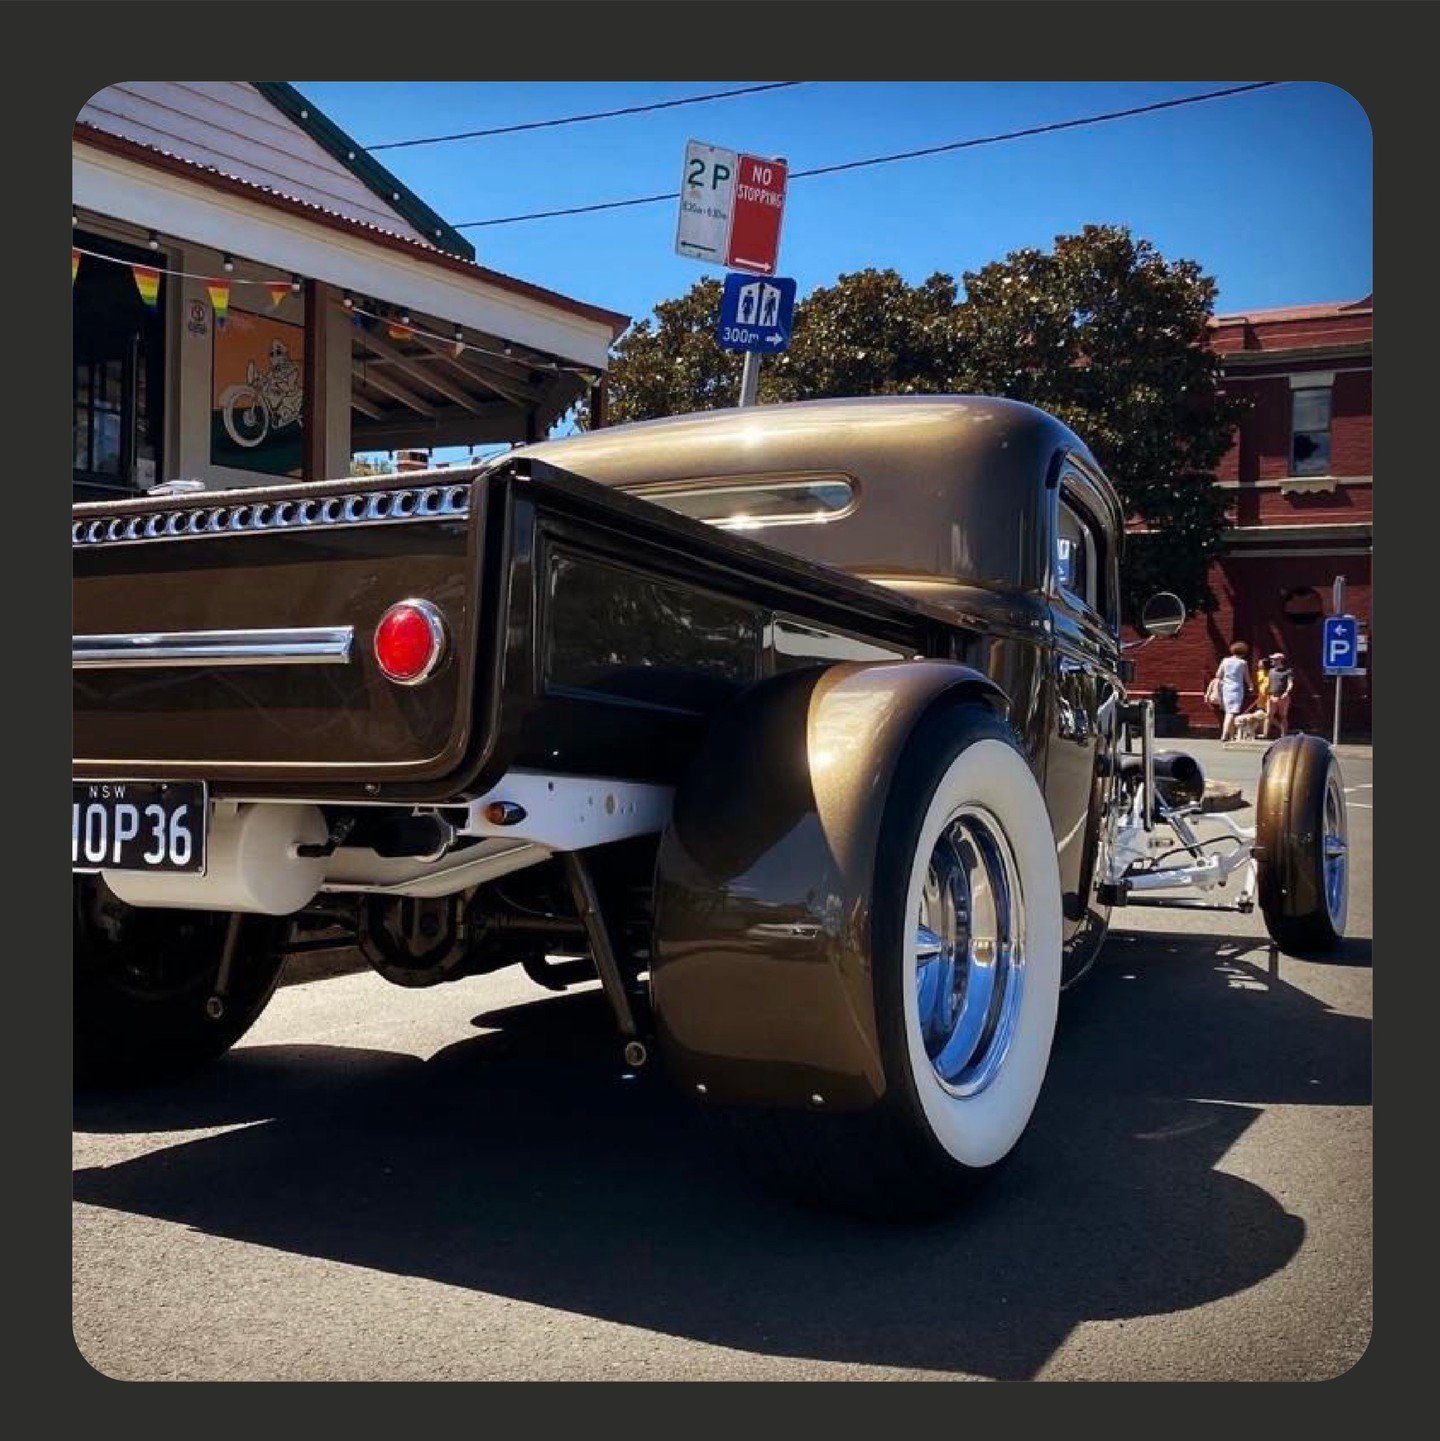 Revving up for good times 🤩
.
.
.
#visitberry #southcoastnsw #berrynsw